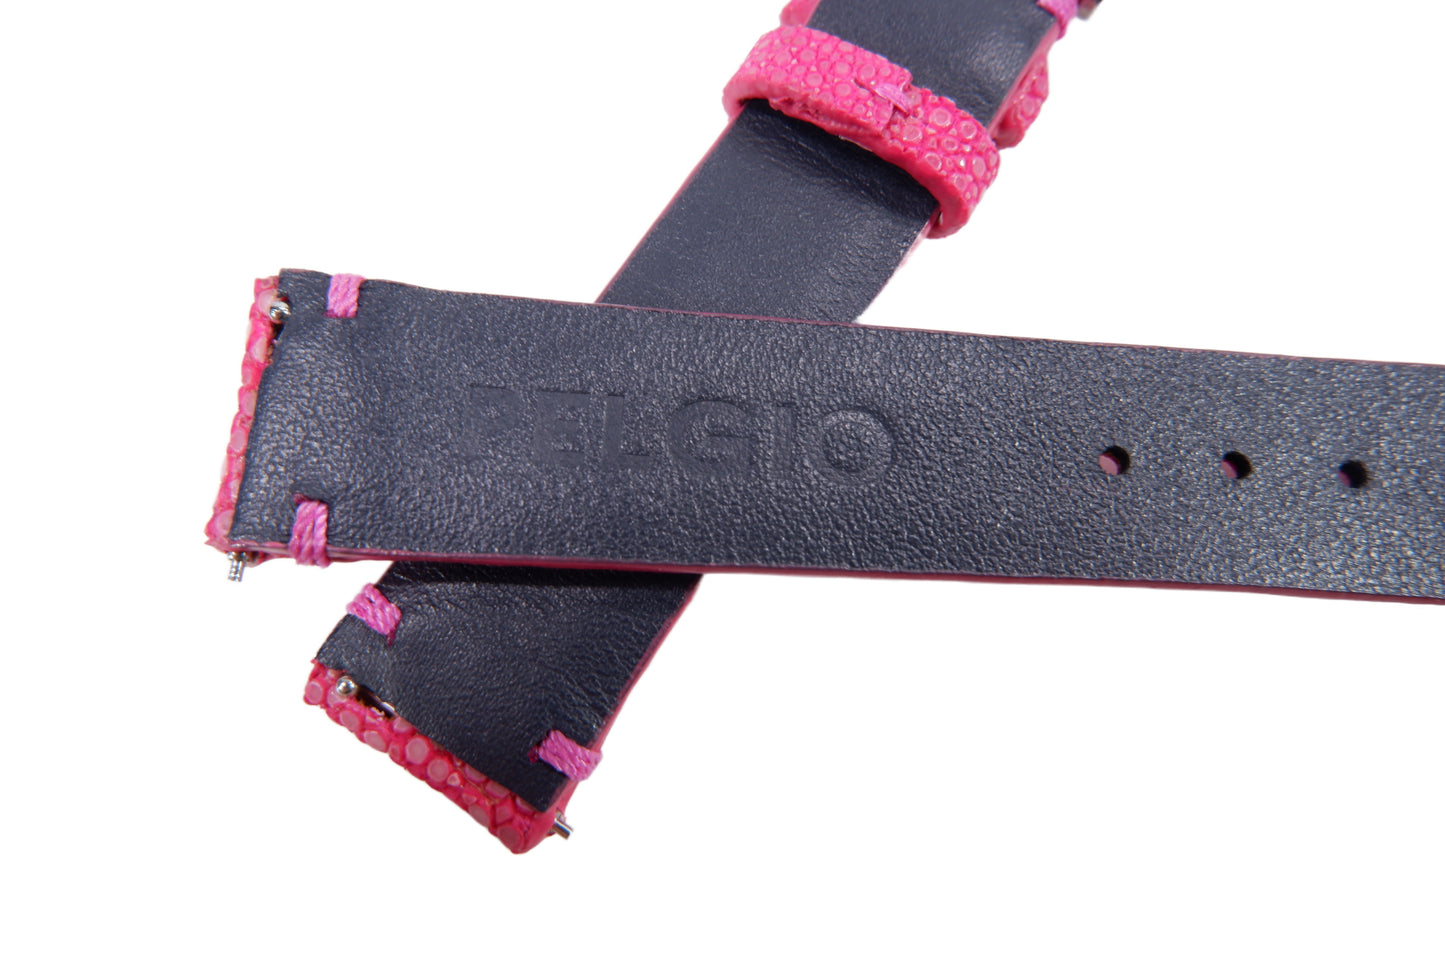 Genuine Polished Stingray Skin Leather Quick Release Watch Strap Pink Band with Buckle